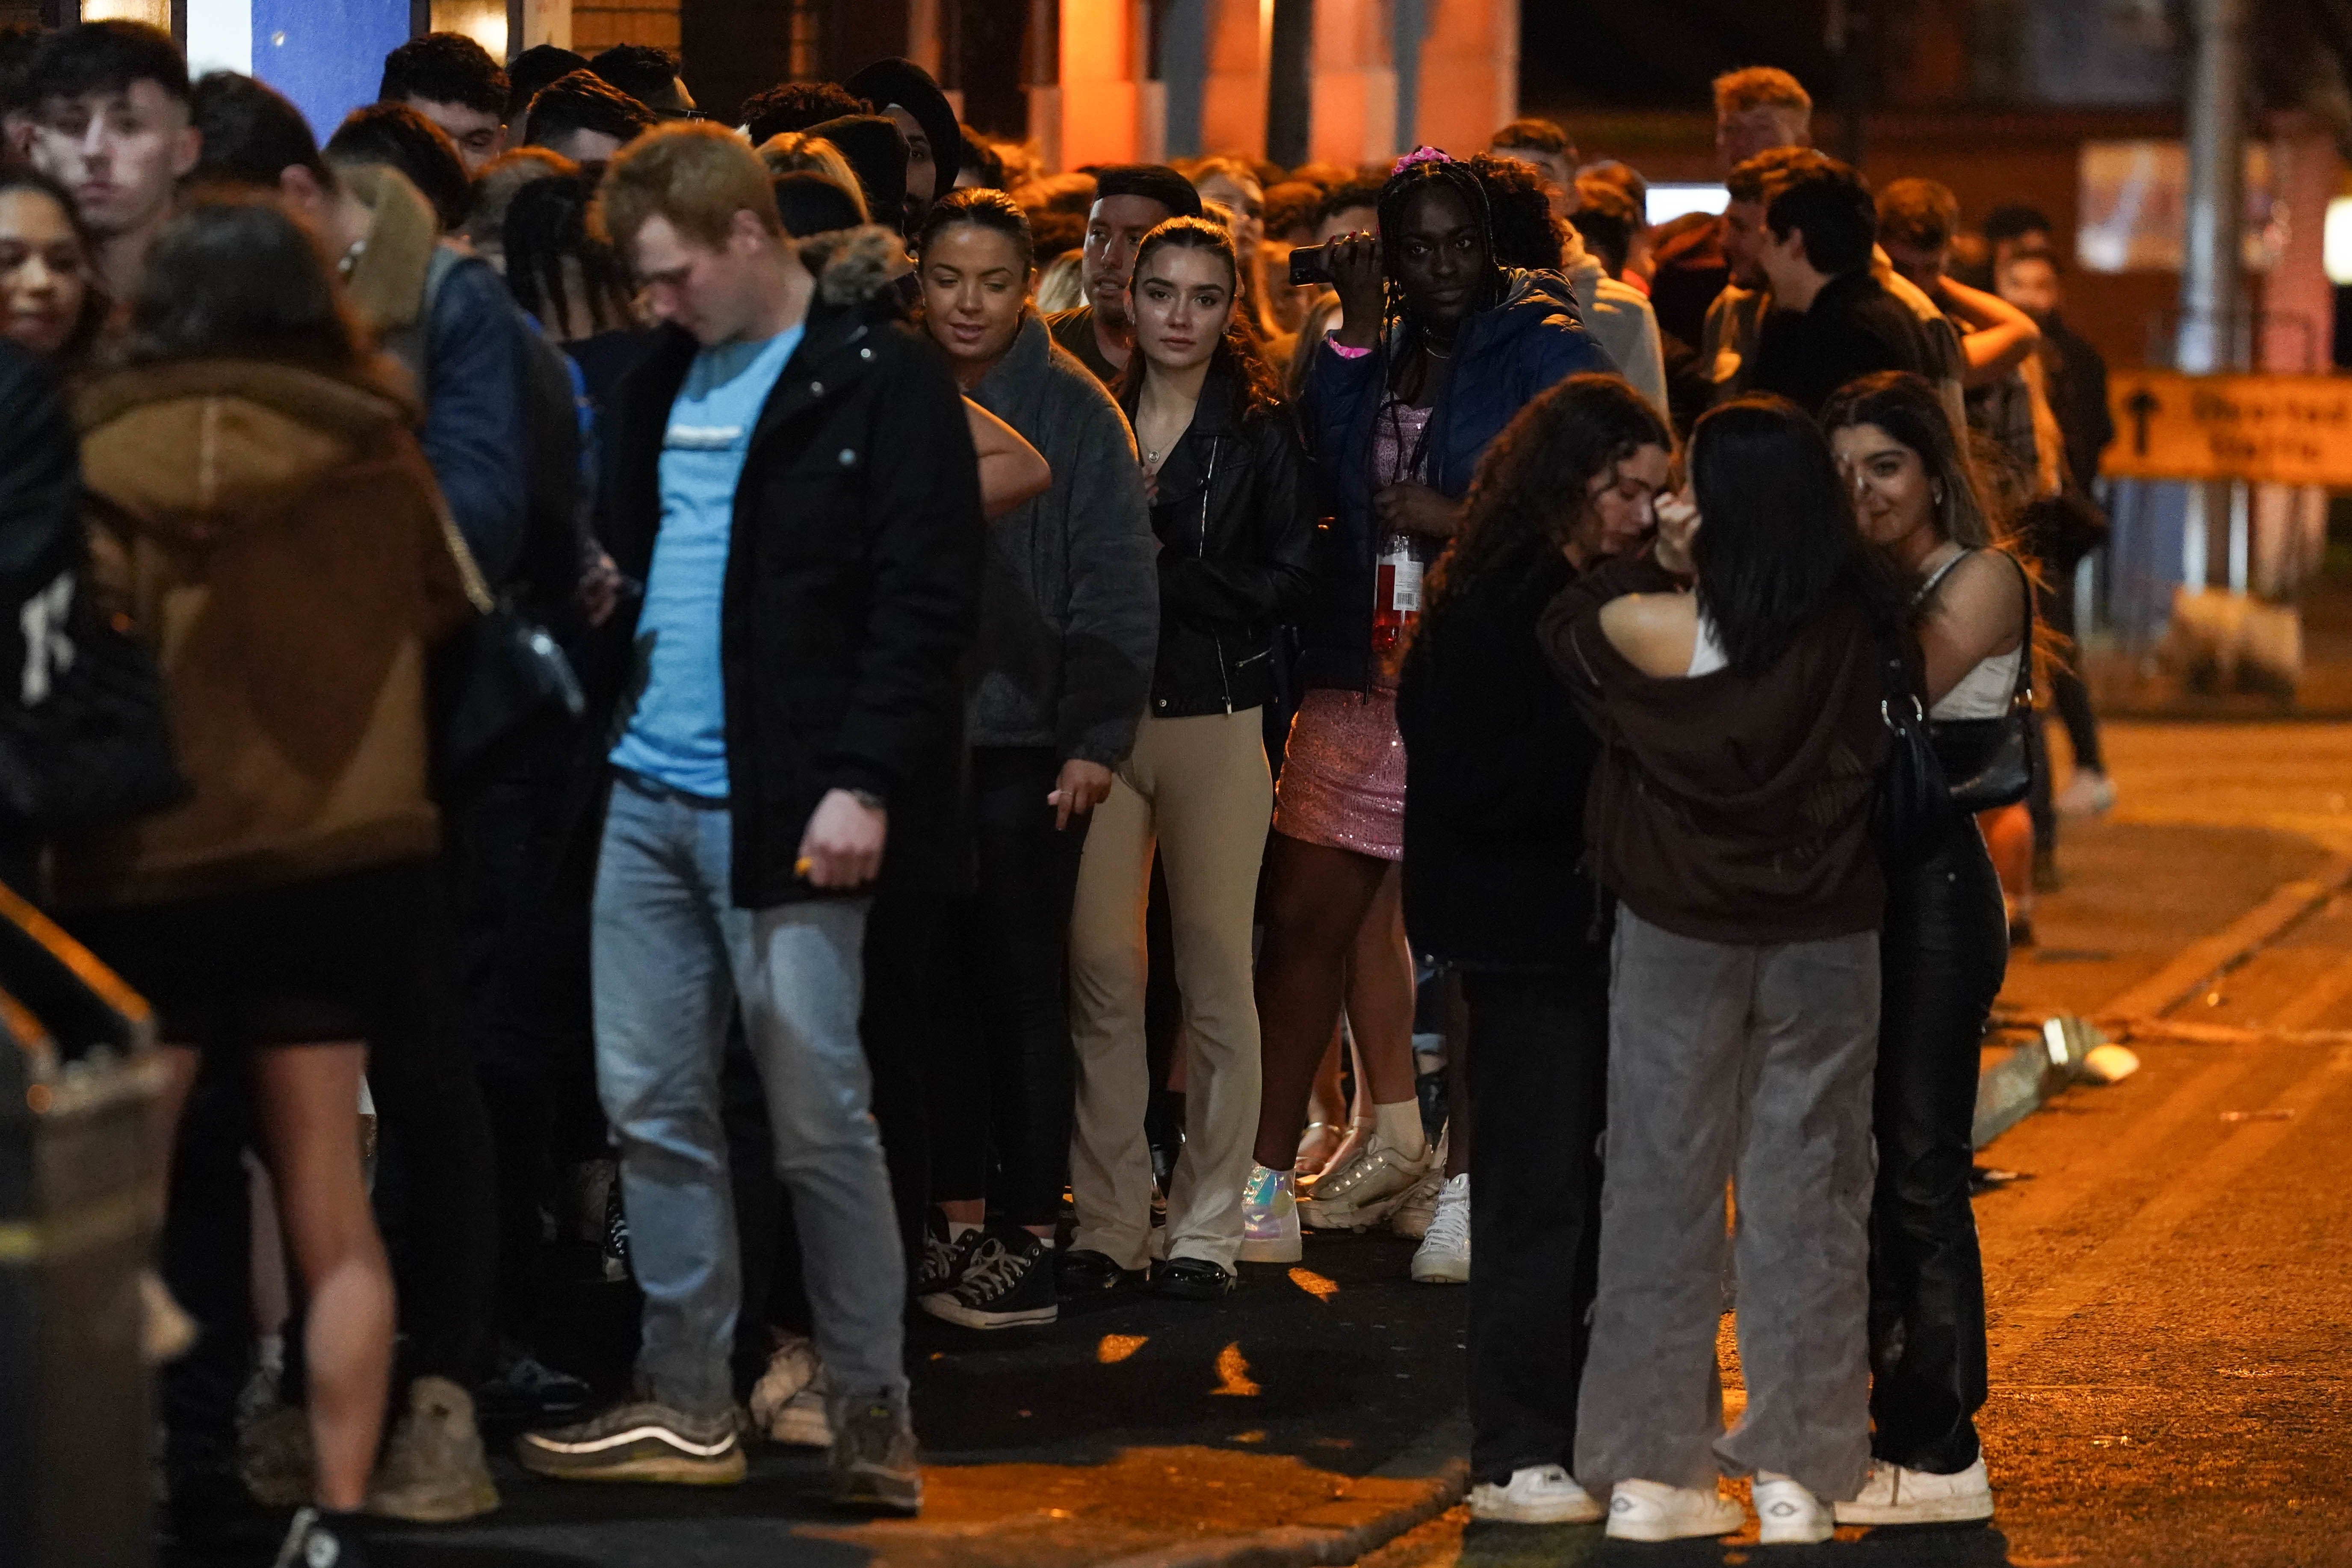 People queuing outside Pryzm night club in happier times: the chain is currently under threat